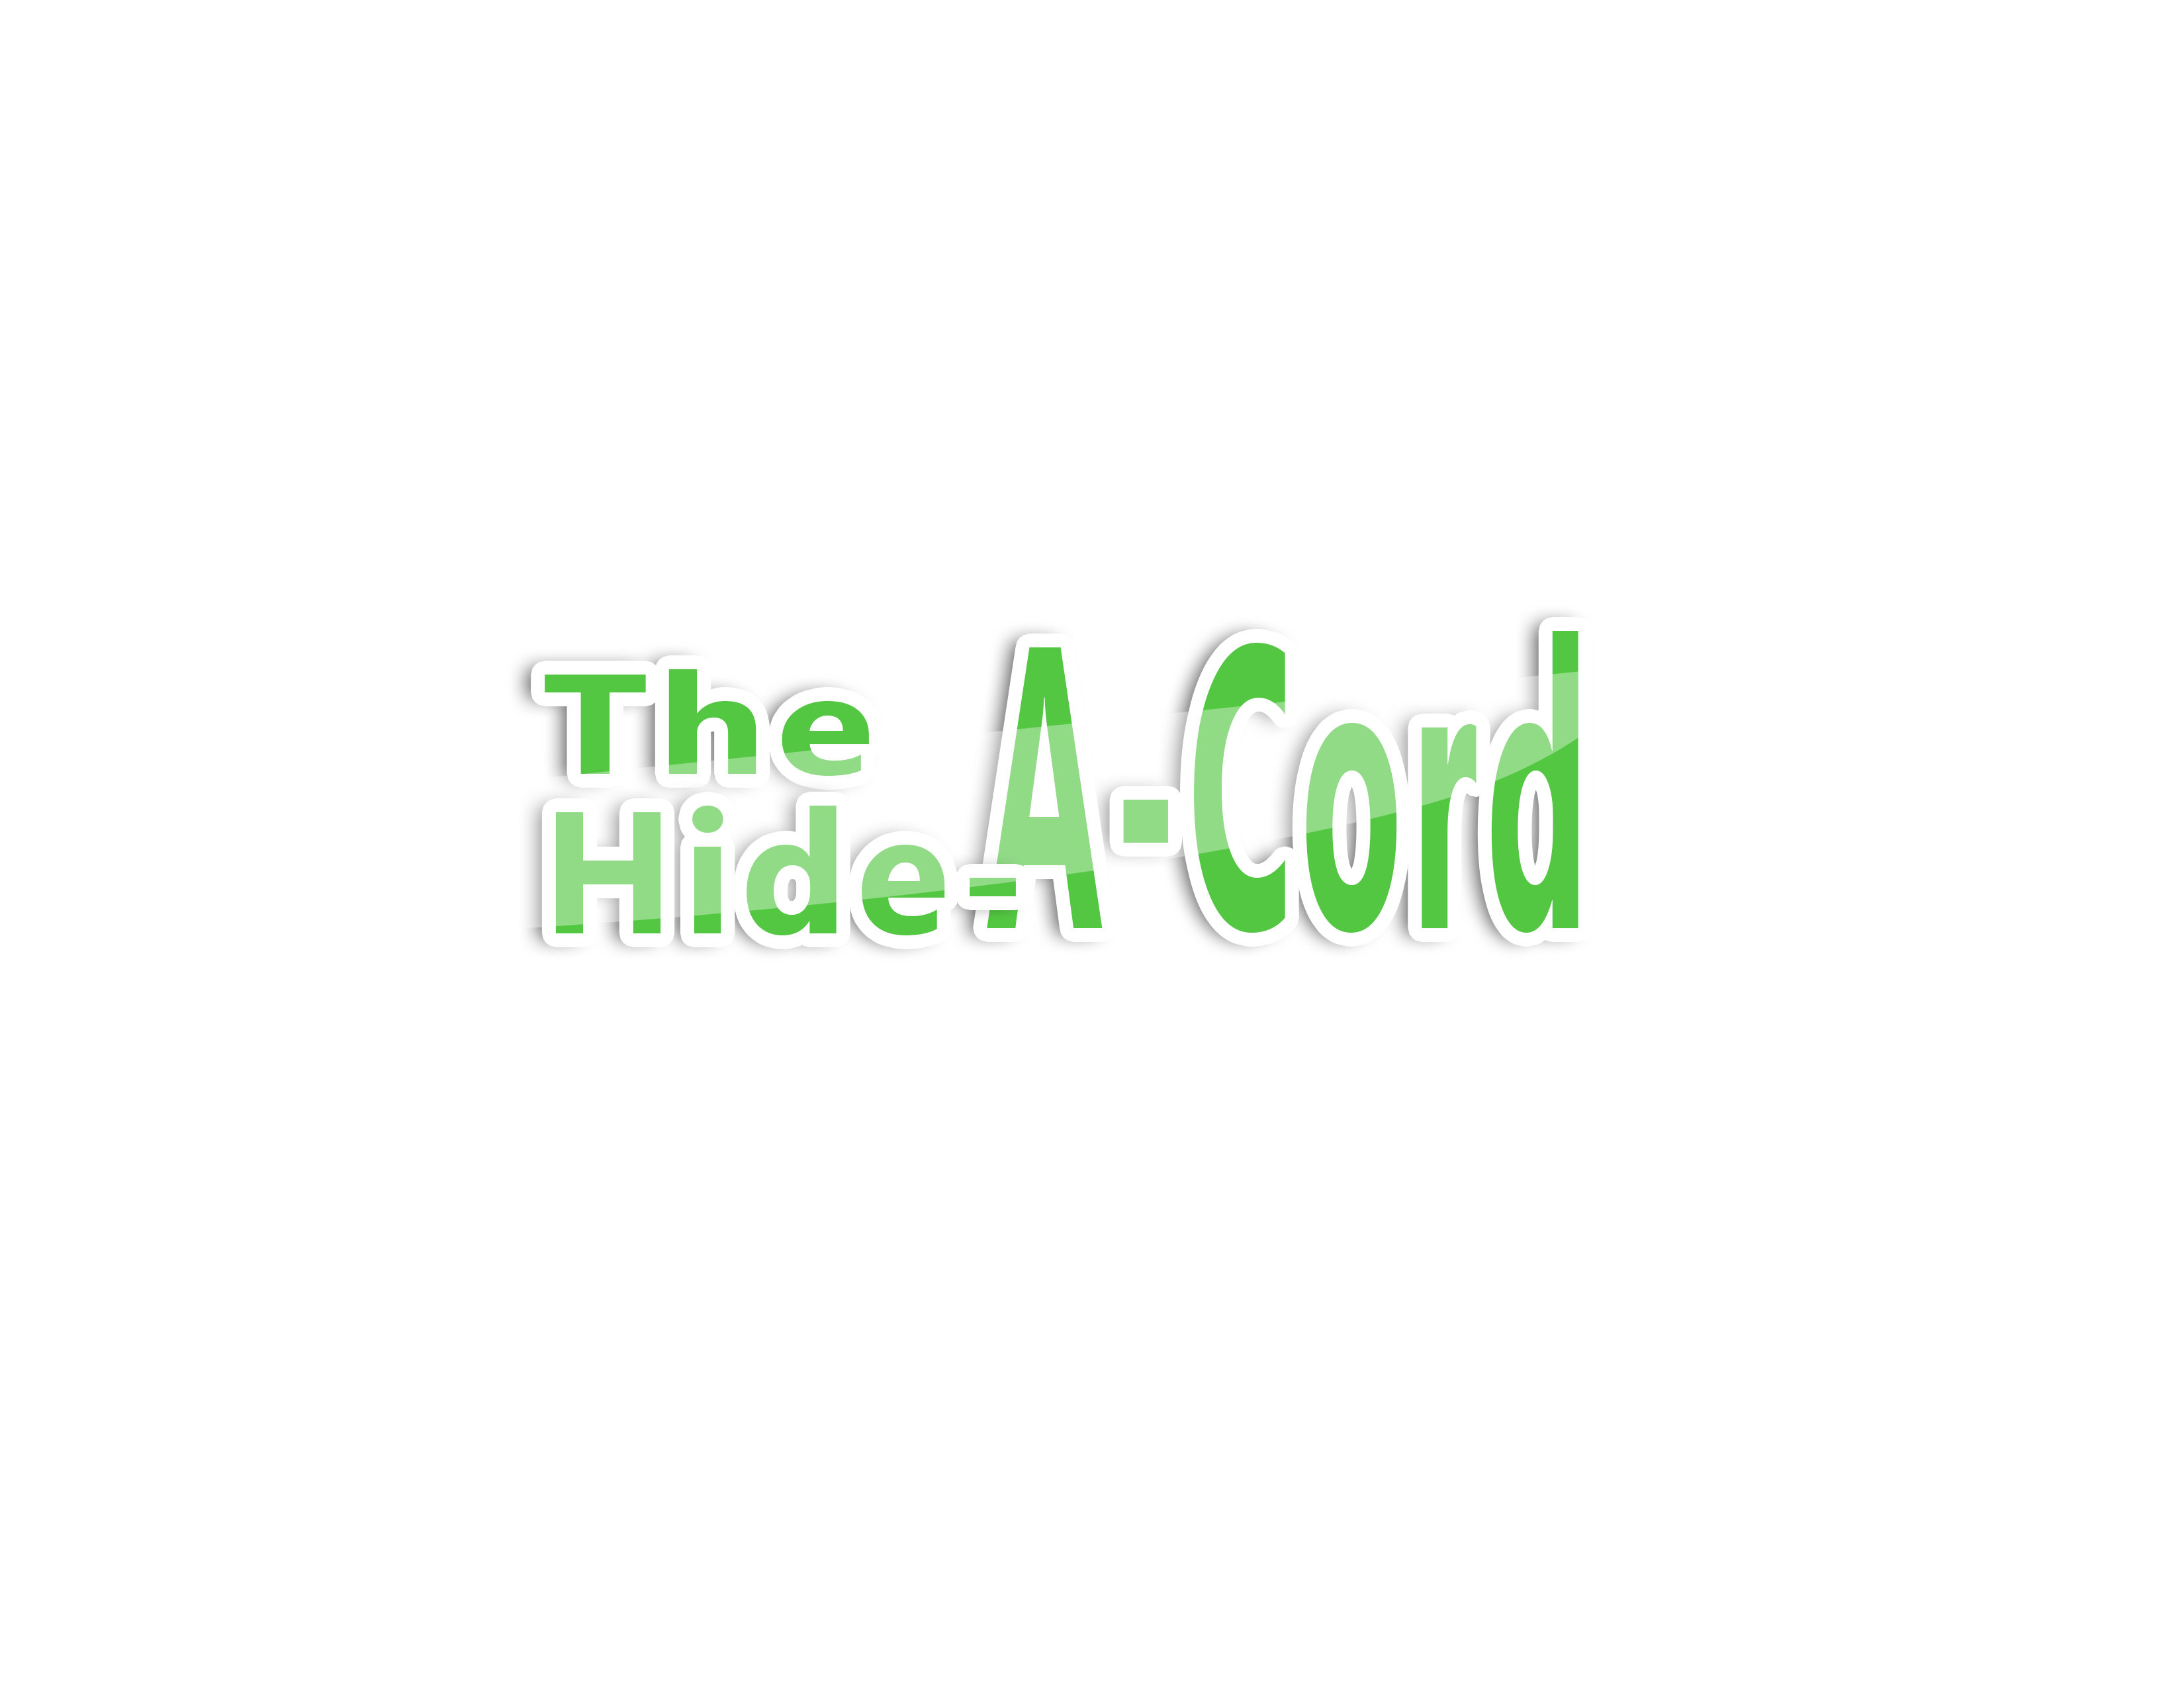 The Hide-A-Cord is a mobile accessory invention designed to provide a practical way to store a mobile phone’s charging cord.